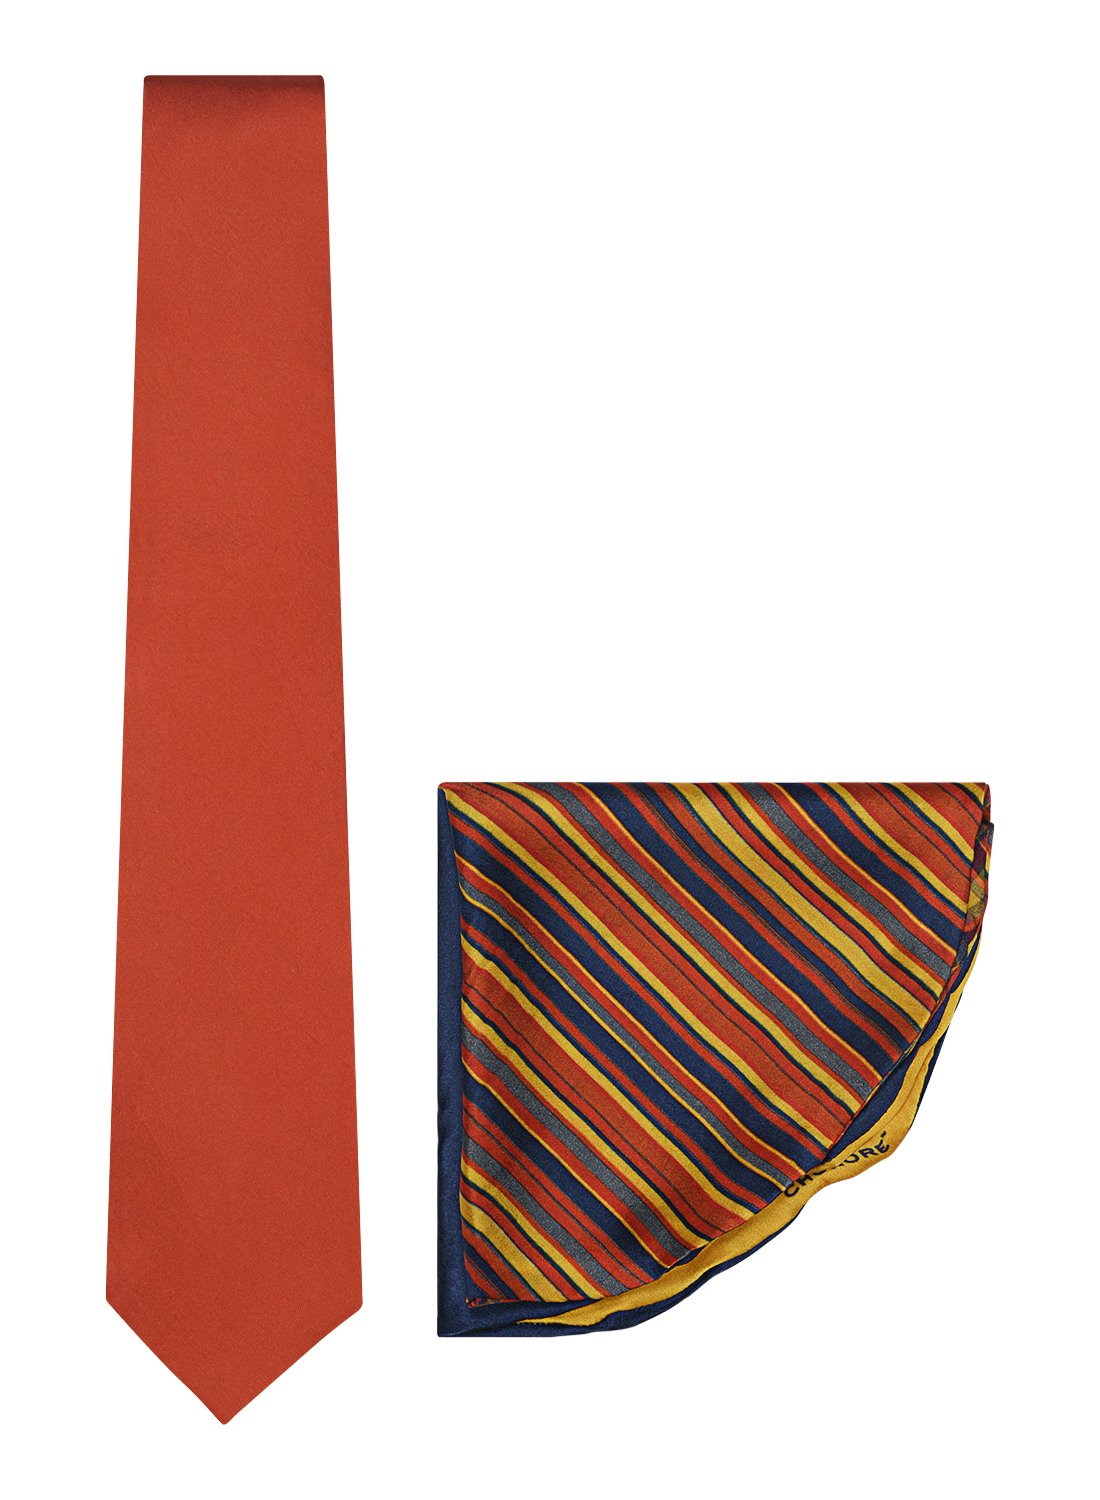 Chokore Red color silk tie & Double-sided Red & Yellow Silk Pocket Circle set